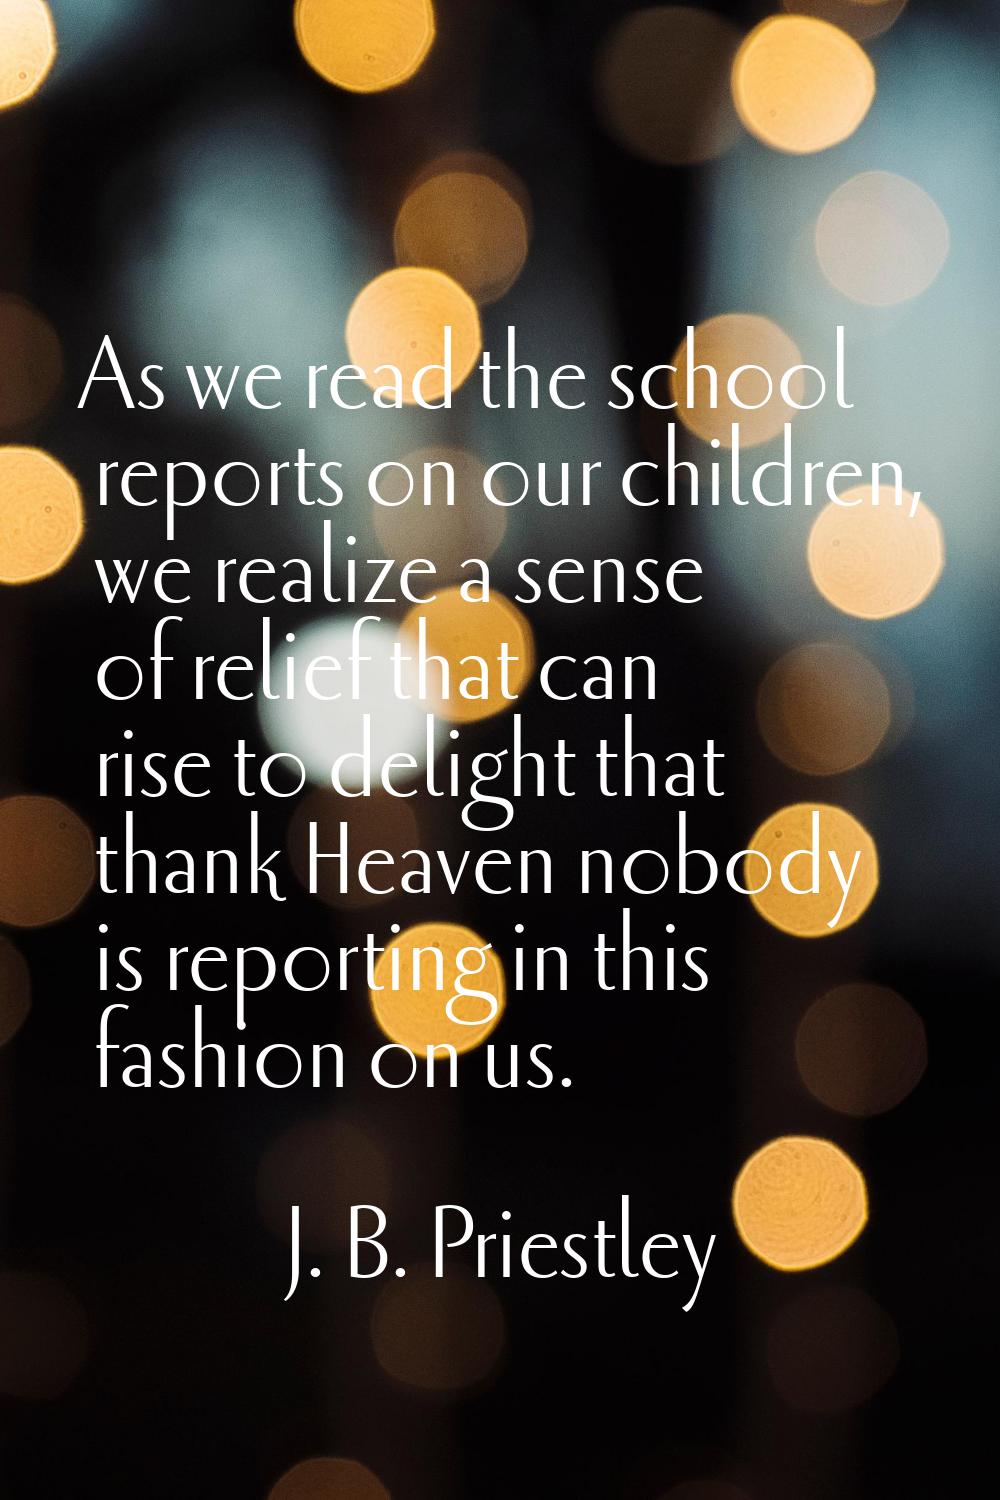 As we read the school reports on our children, we realize a sense of relief that can rise to deligh